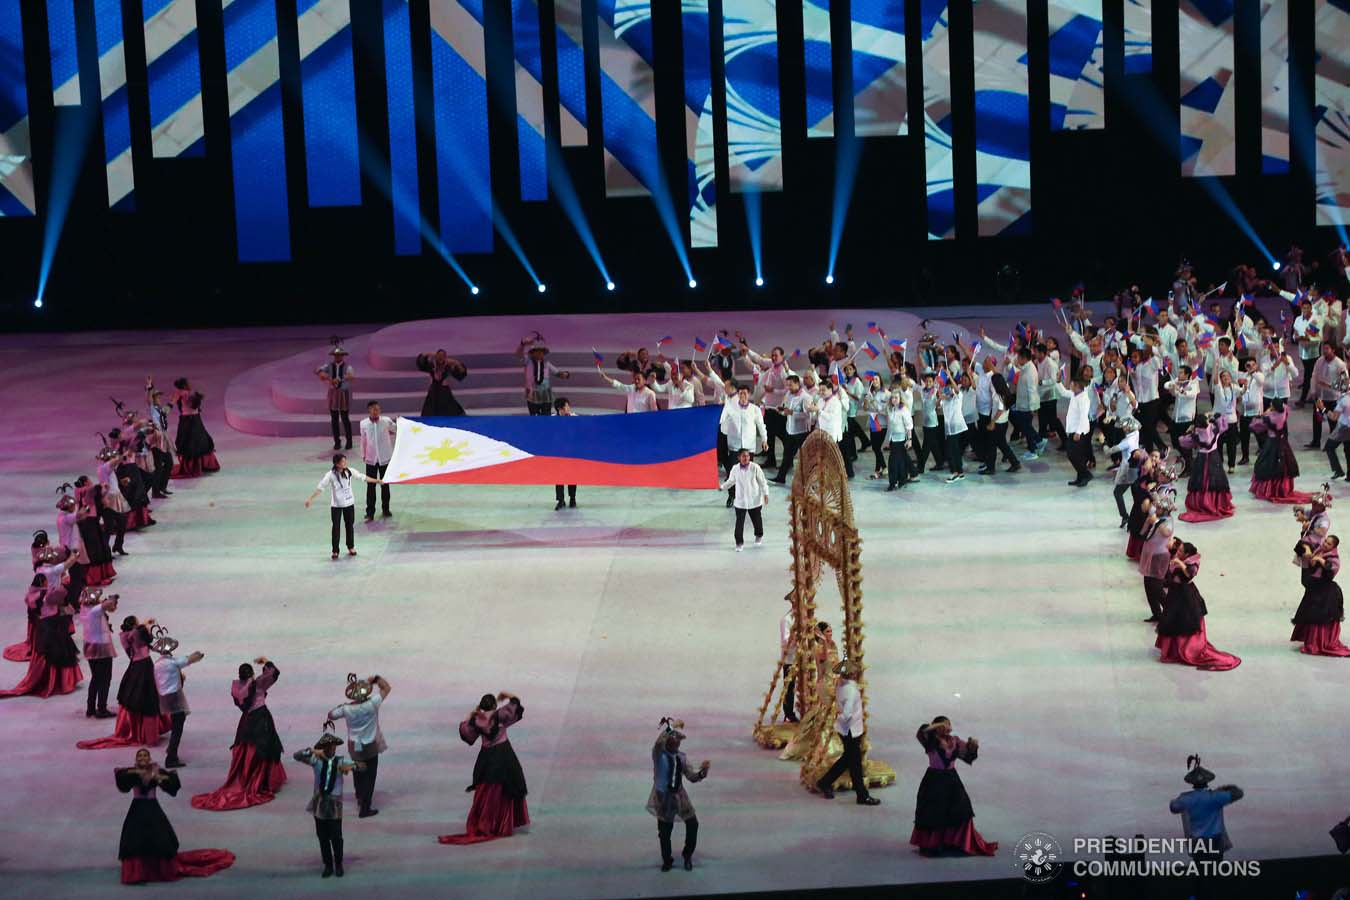 Filipino athletes during the opening ceremony of the 30th SEA Games